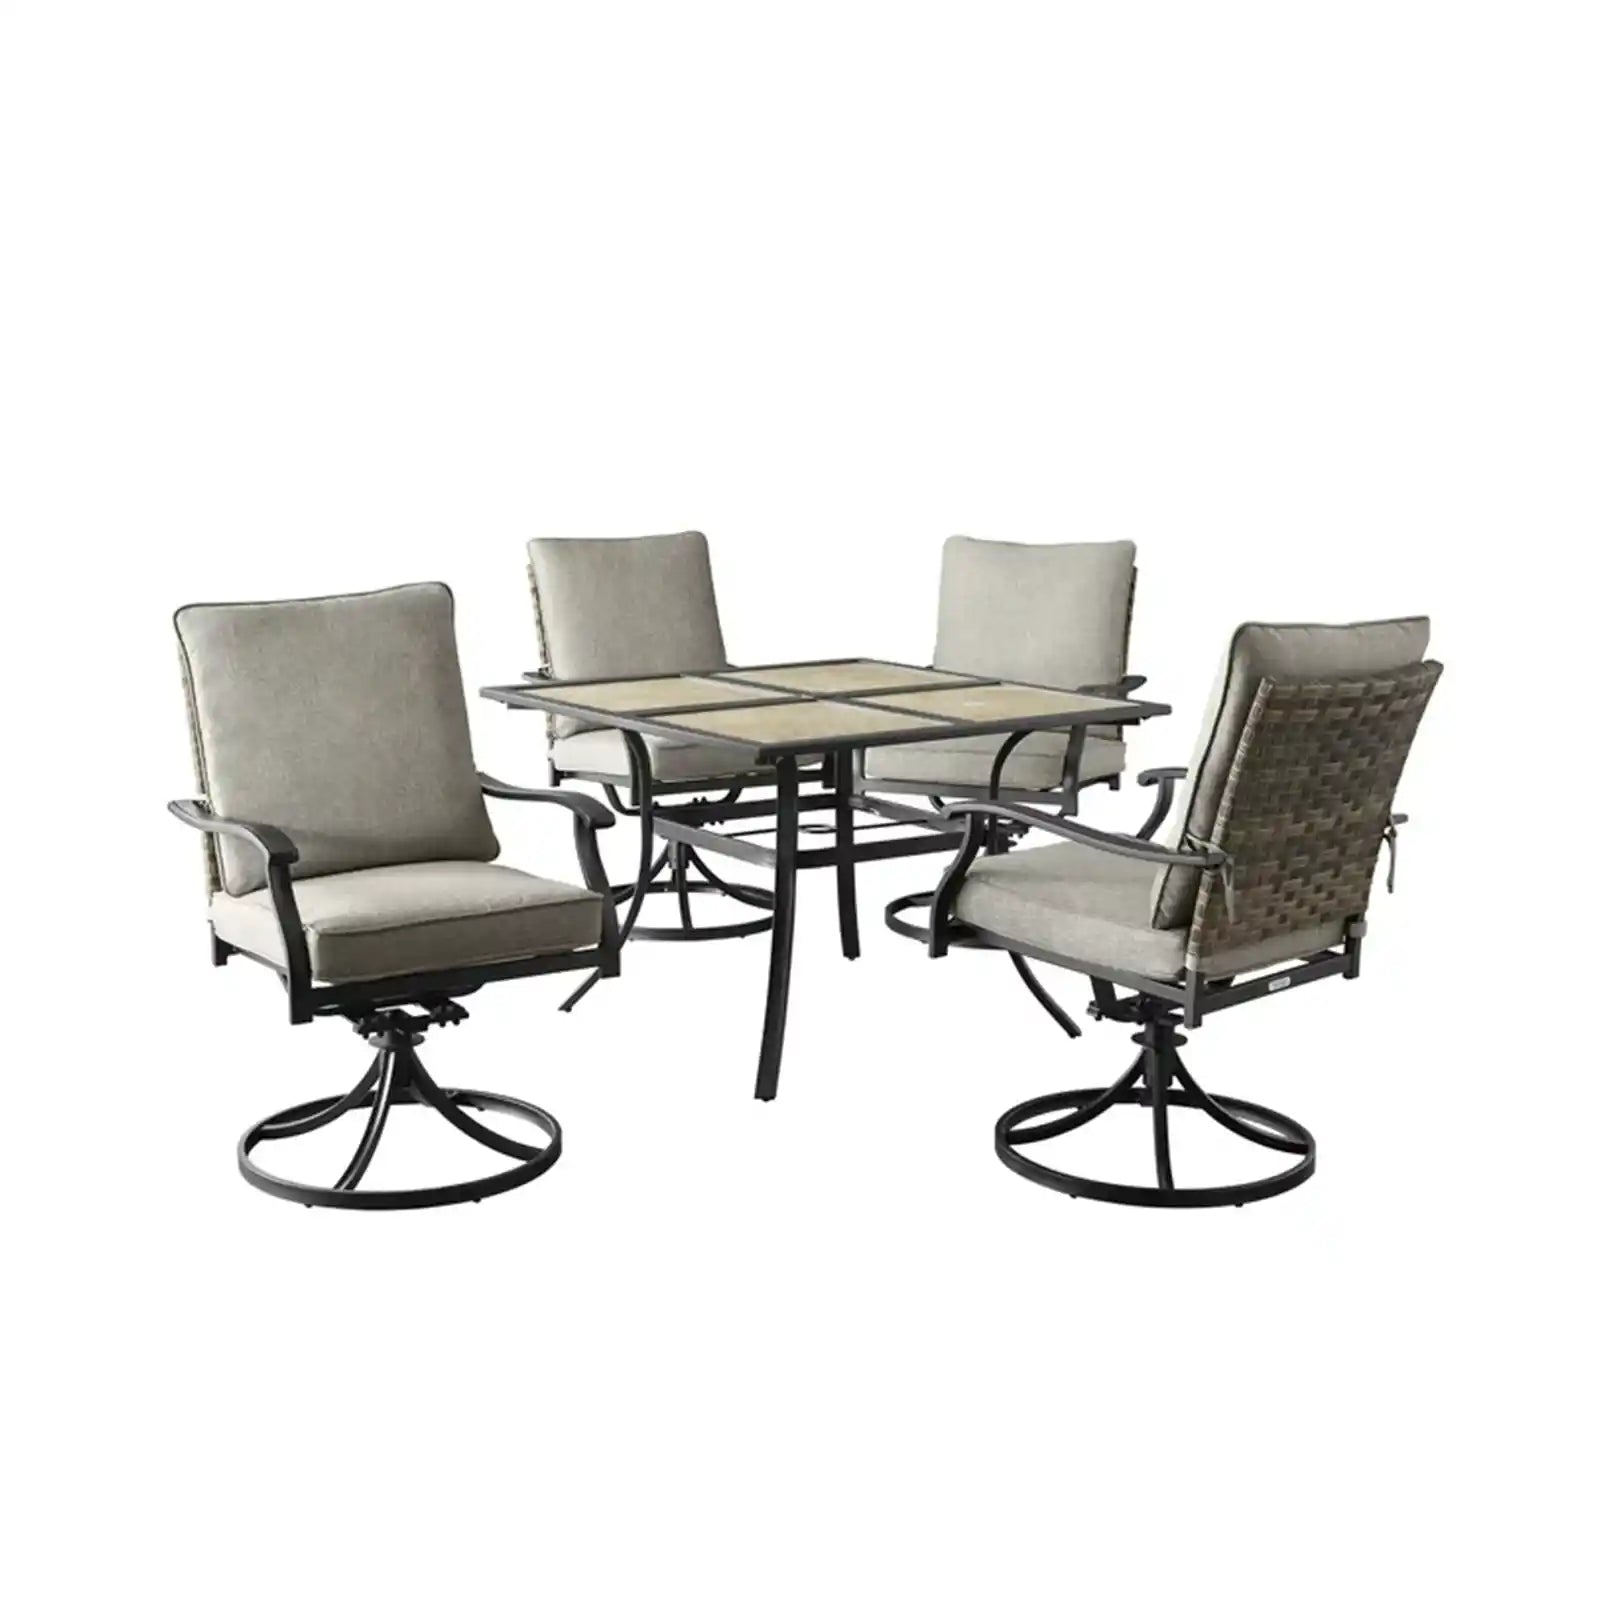 Gray Outdoor Dining Table and Chairs - Outdoor Furniture Sets